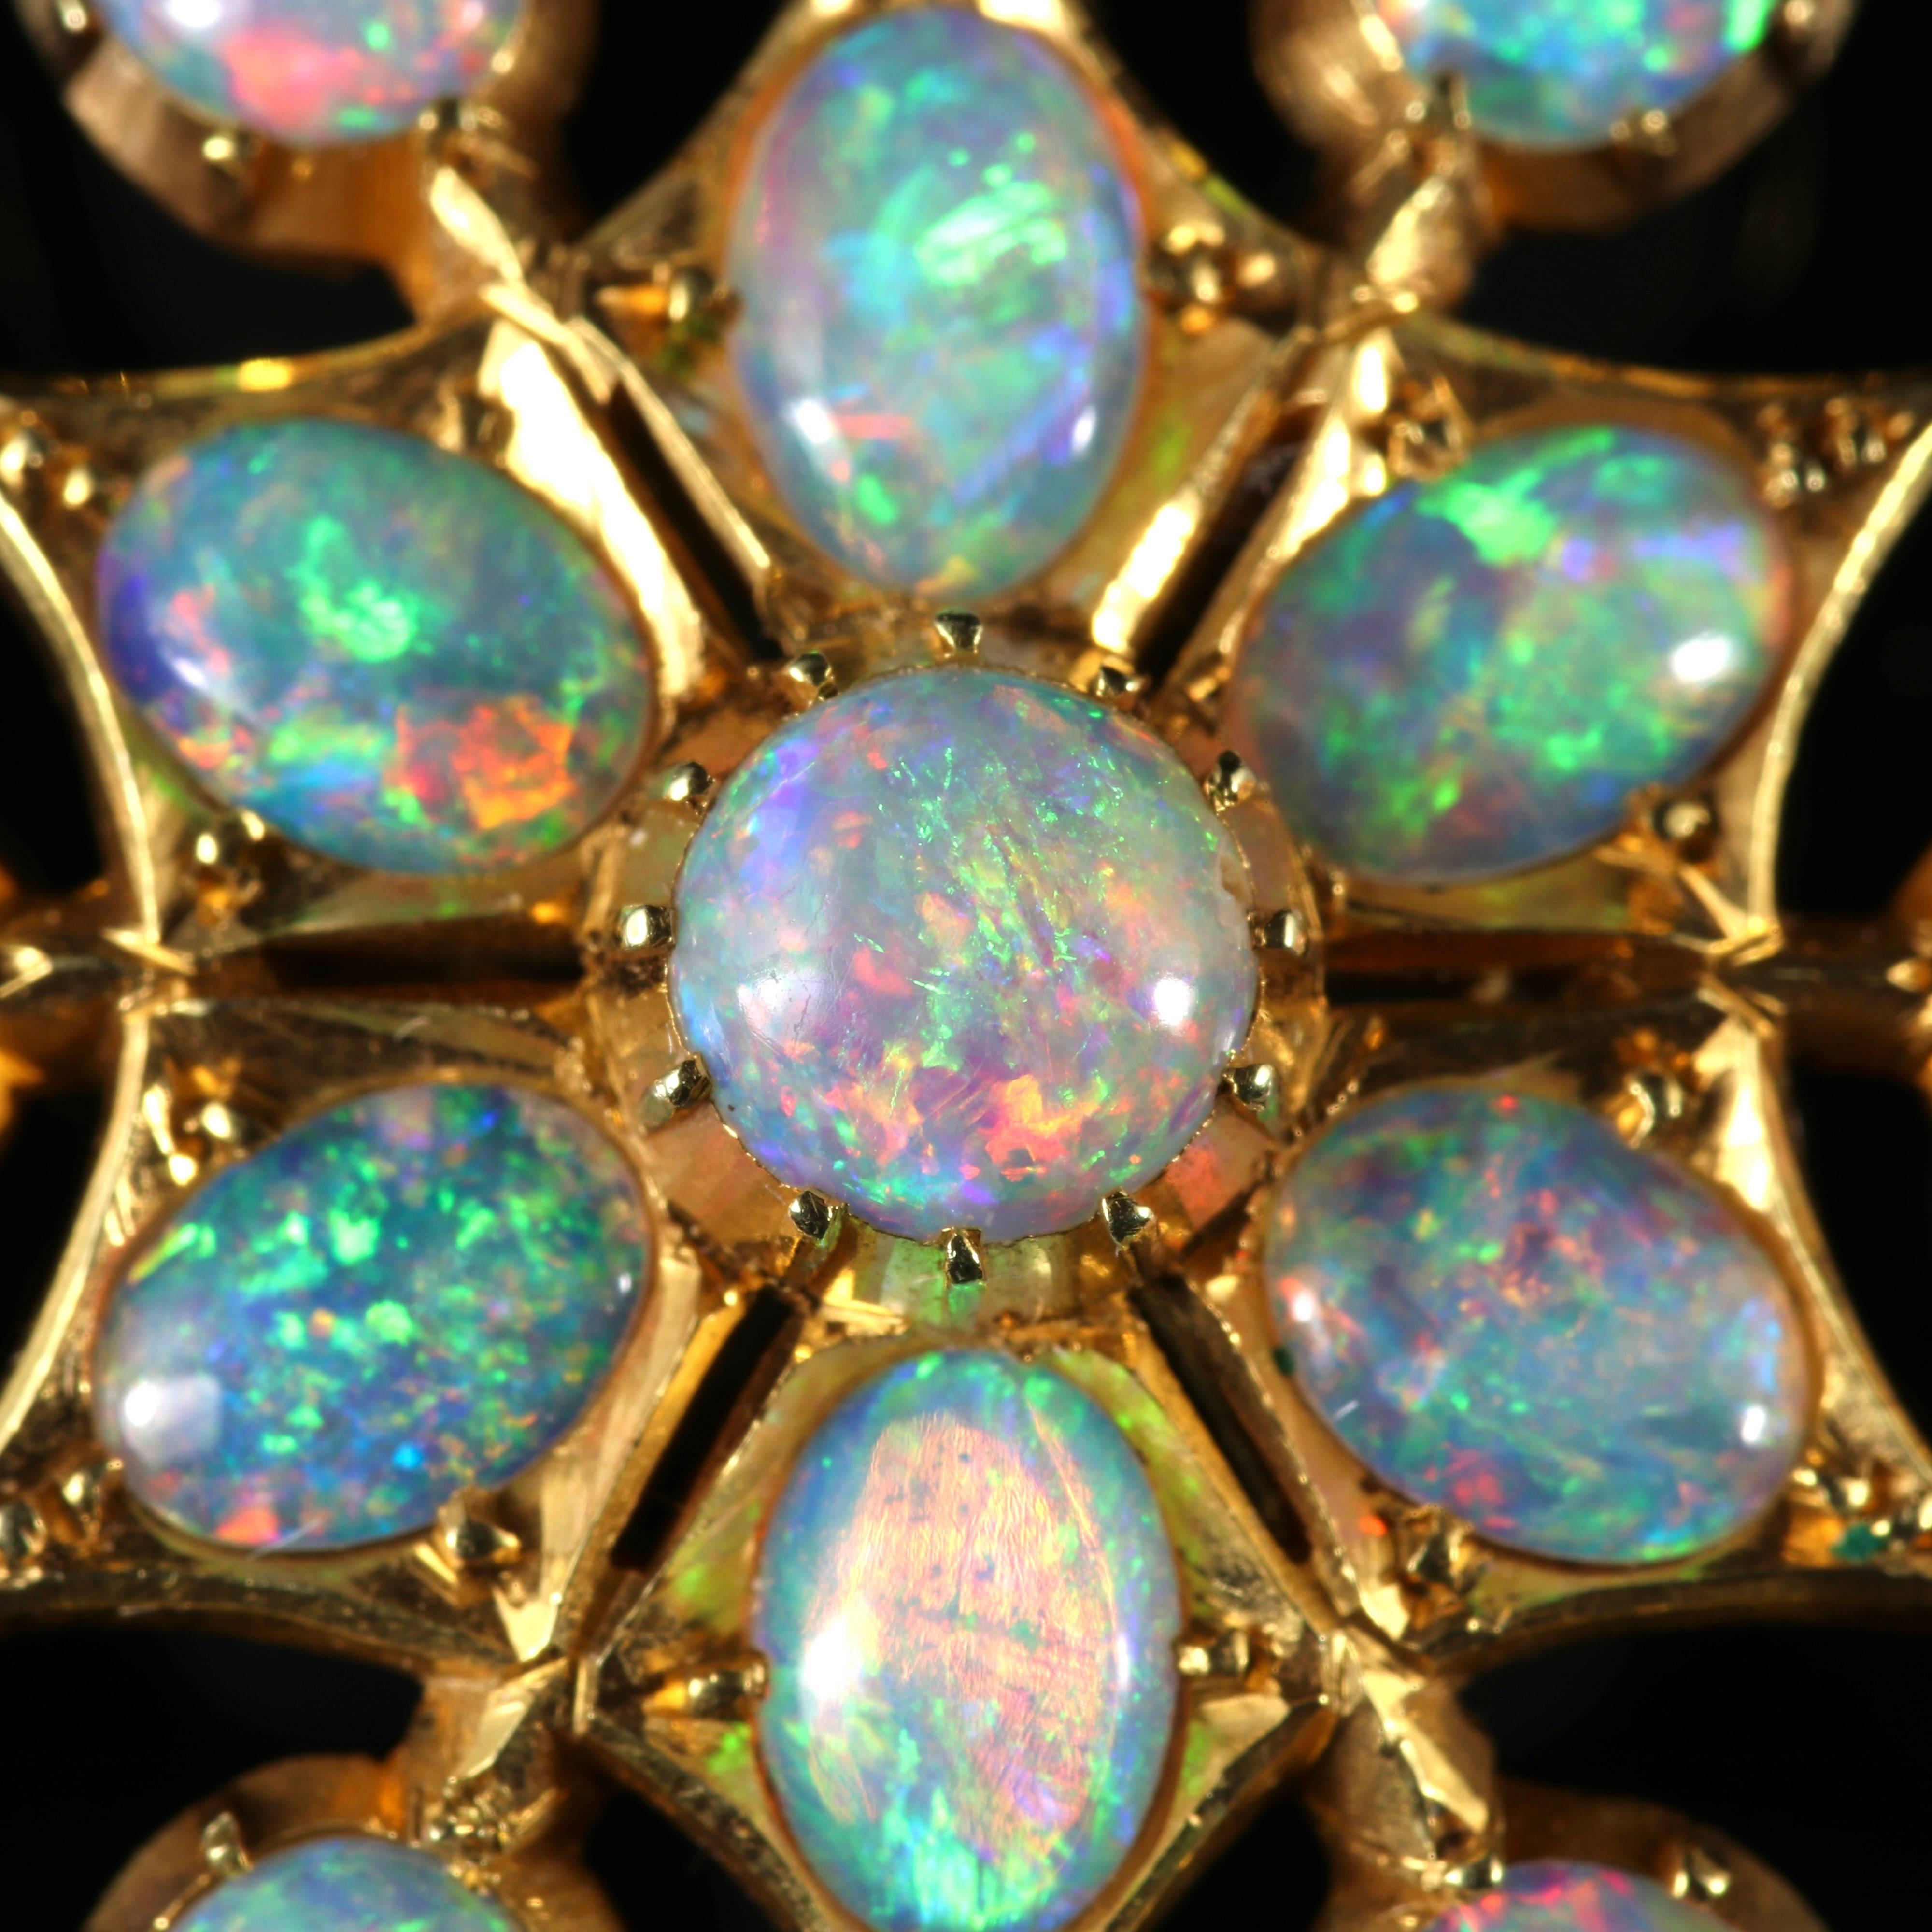 This very beautiful brooch is from the Victorian era set with natural Opals and modelled in 18ct Gold.

Thirteen fabulous natural colourful Opals adorn this spectacular show piece.

The lovely natural Opal is a kaleidoscope of rainbow colours